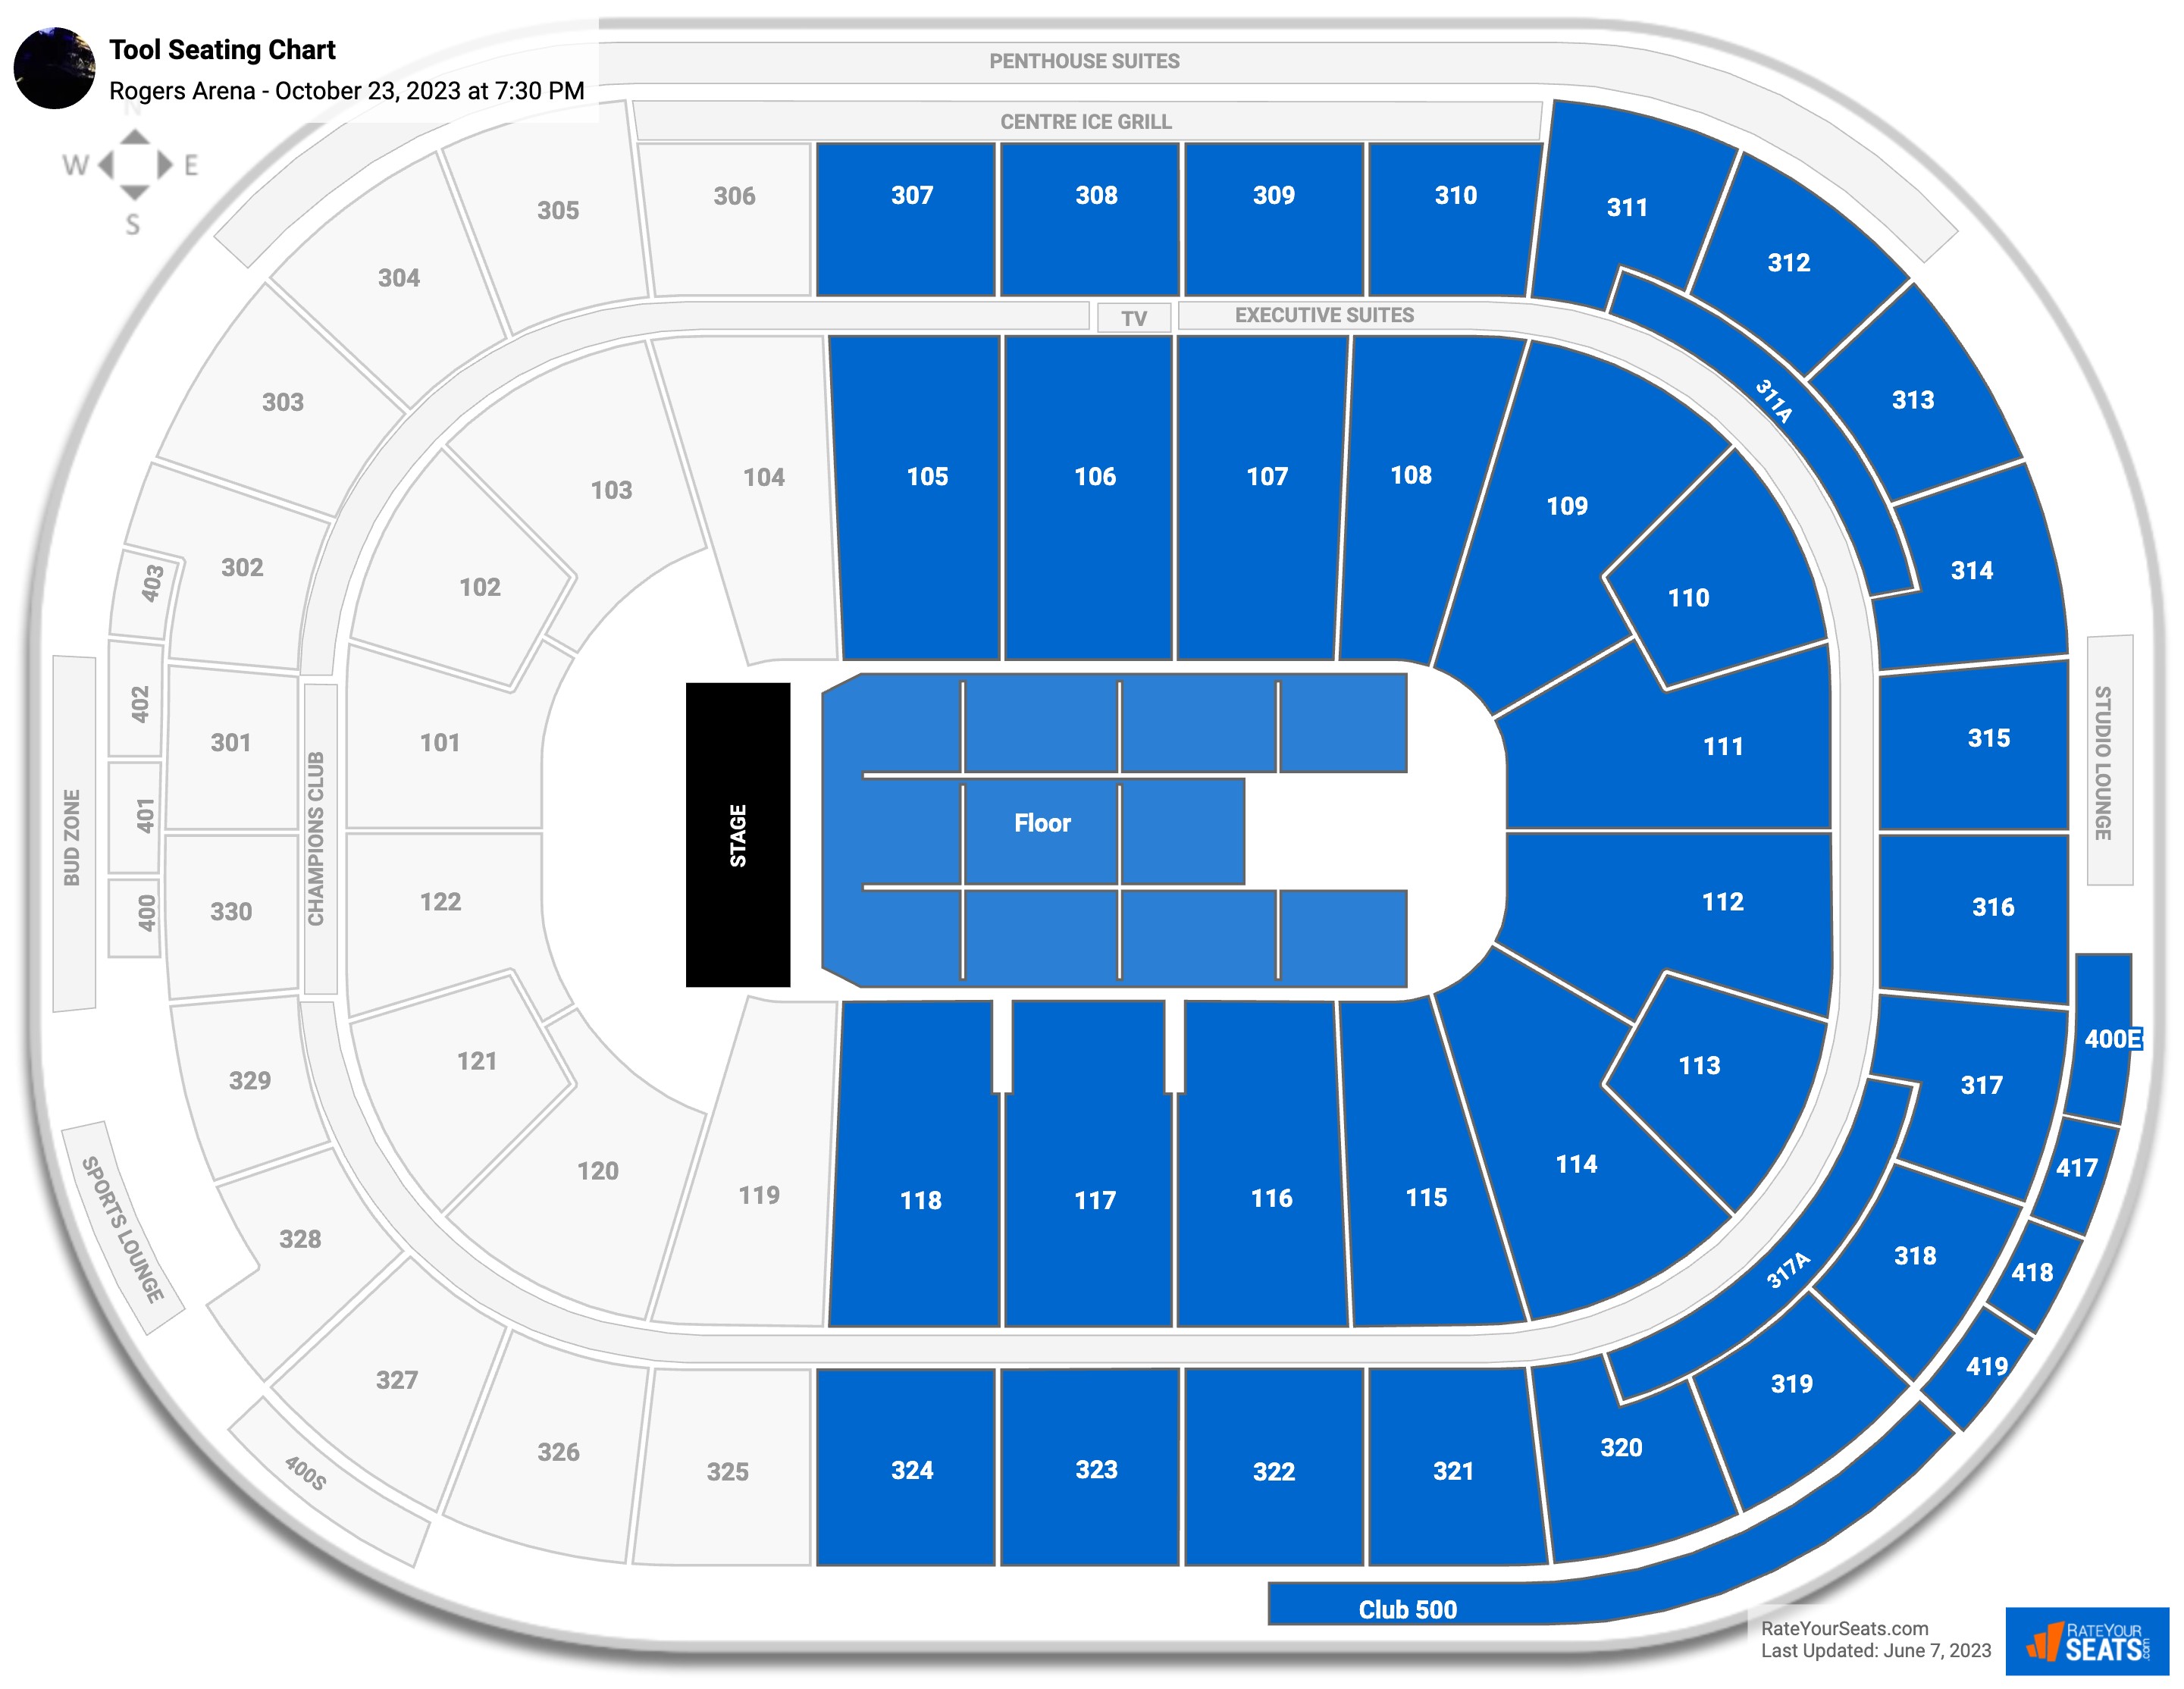 Tool Rogers Arena Seating Chart October 23 2023 4450814 